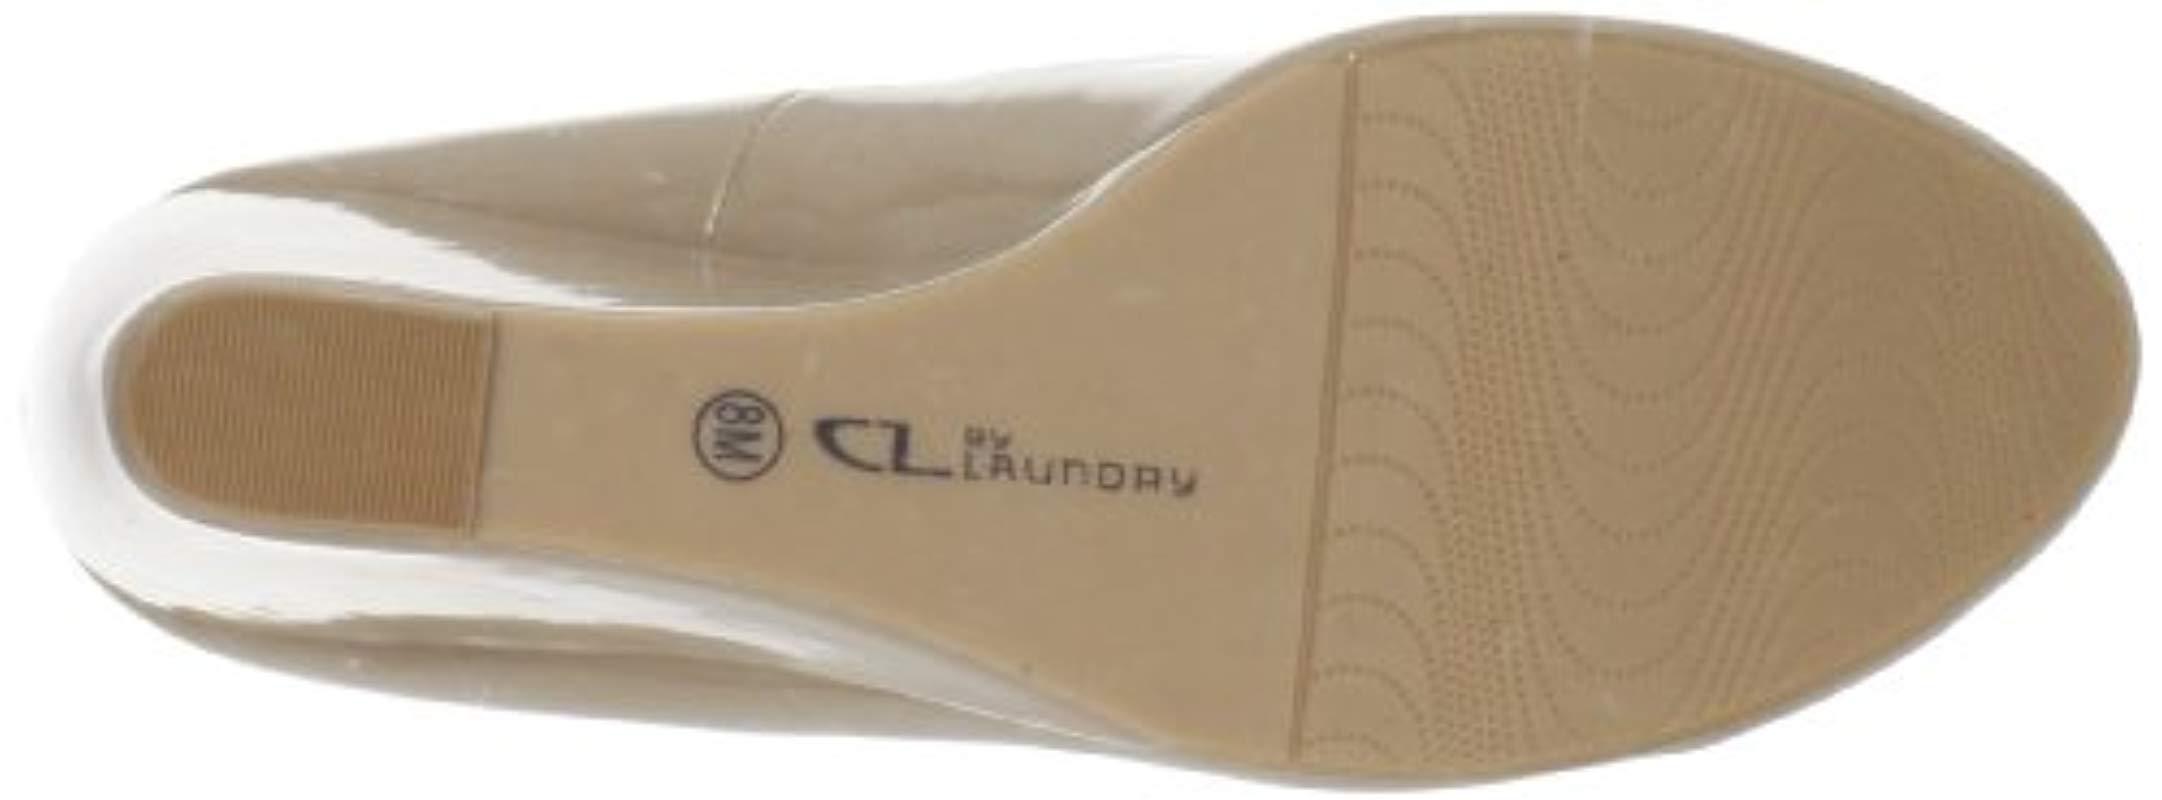 CL by Laundry Nima | Patent leather shoes, Patent leather 